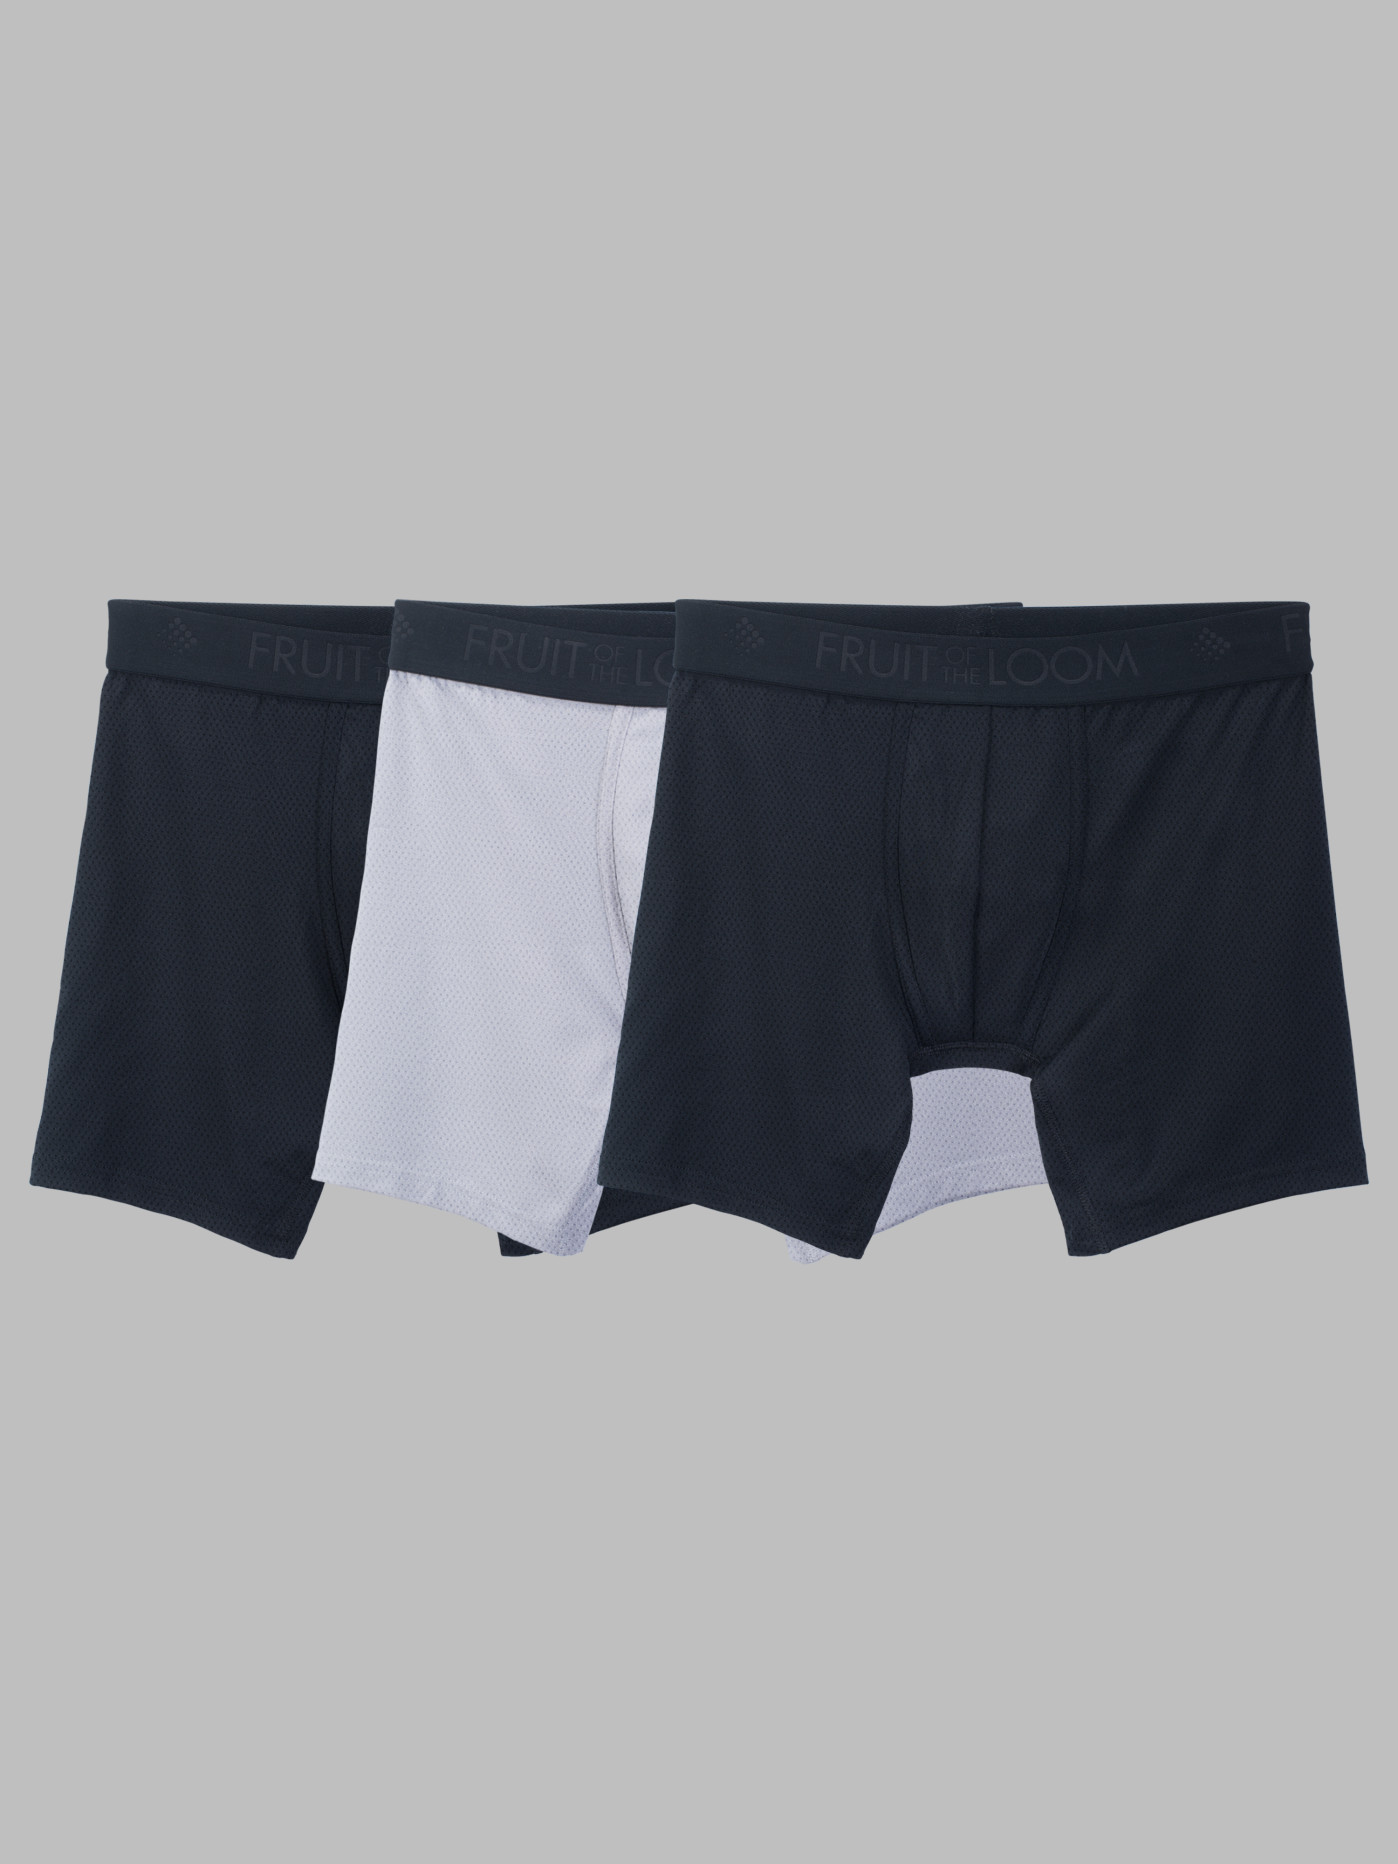 A20 Fruit of the Loom Select Breathable Cotton-Mesh 4pk Boxer Brief W BONUS  S - Catania Gomme S.r.l.